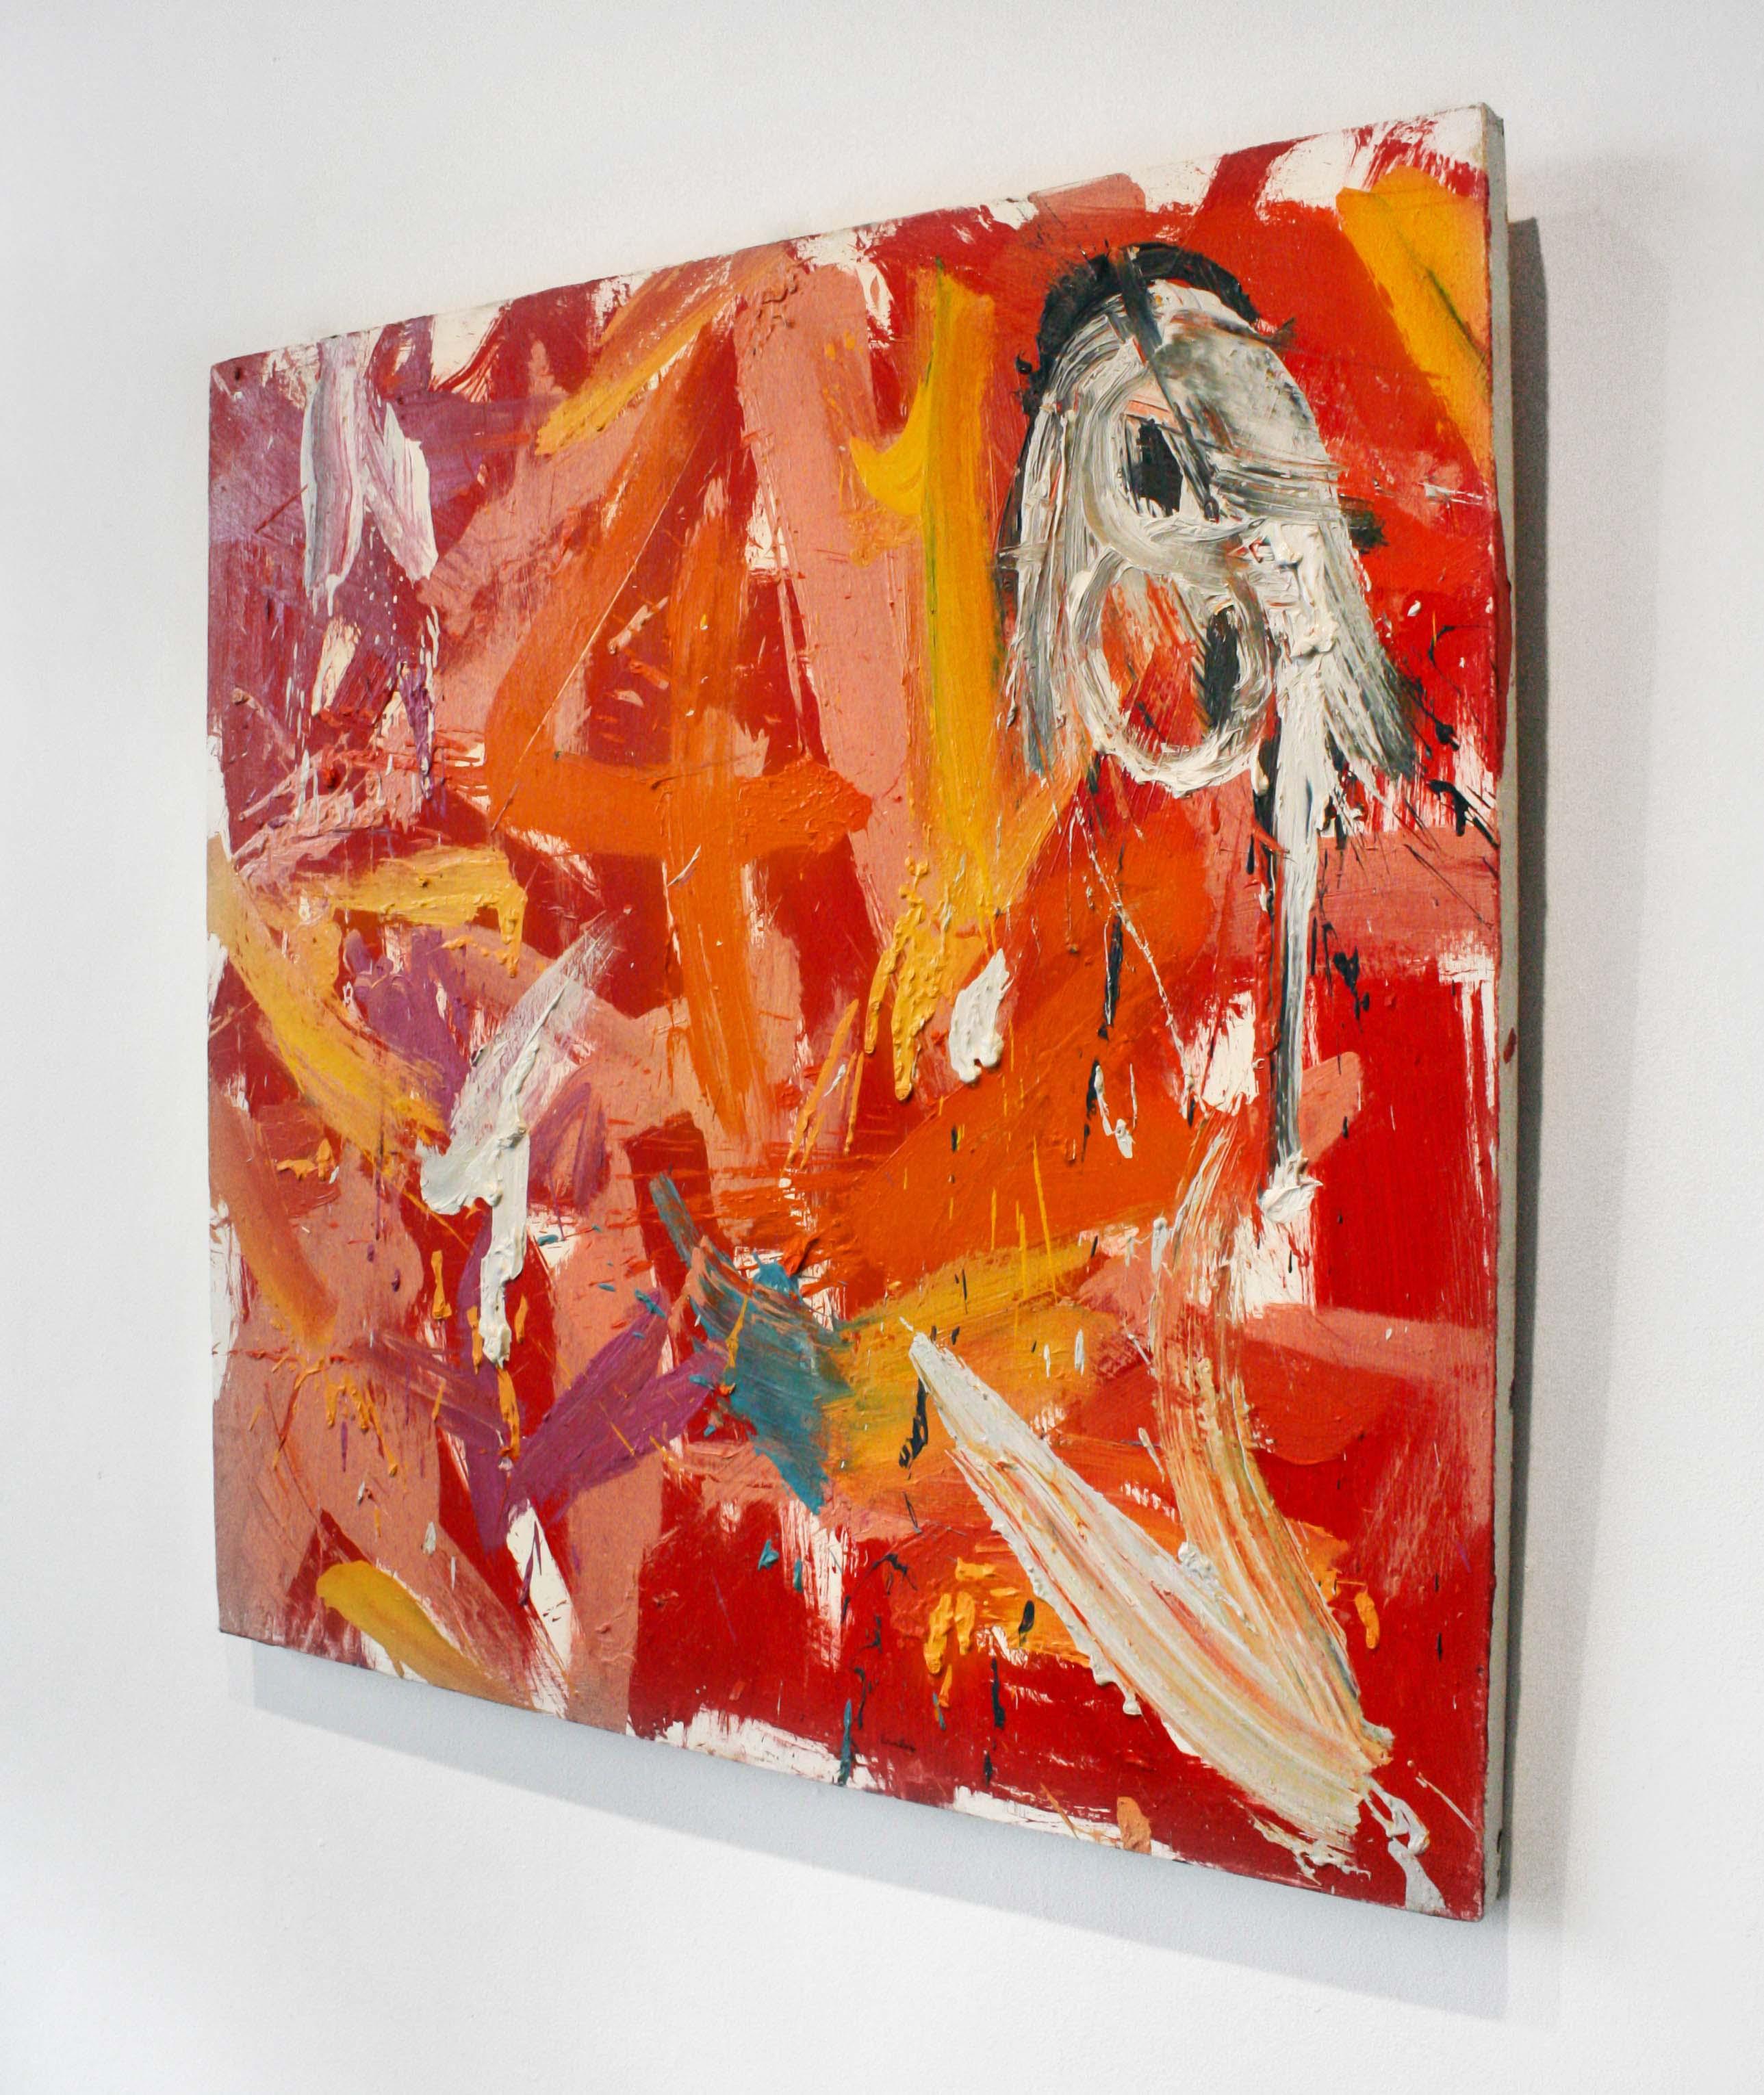 This abstract oil painting on canvas is brightly colored with orange, yellow, violet, and red.

Aaron Worley is a painter best known for often utilizing long, sweeping gestures of highly contrasting and vivid oil paint colors on large scale mediums.